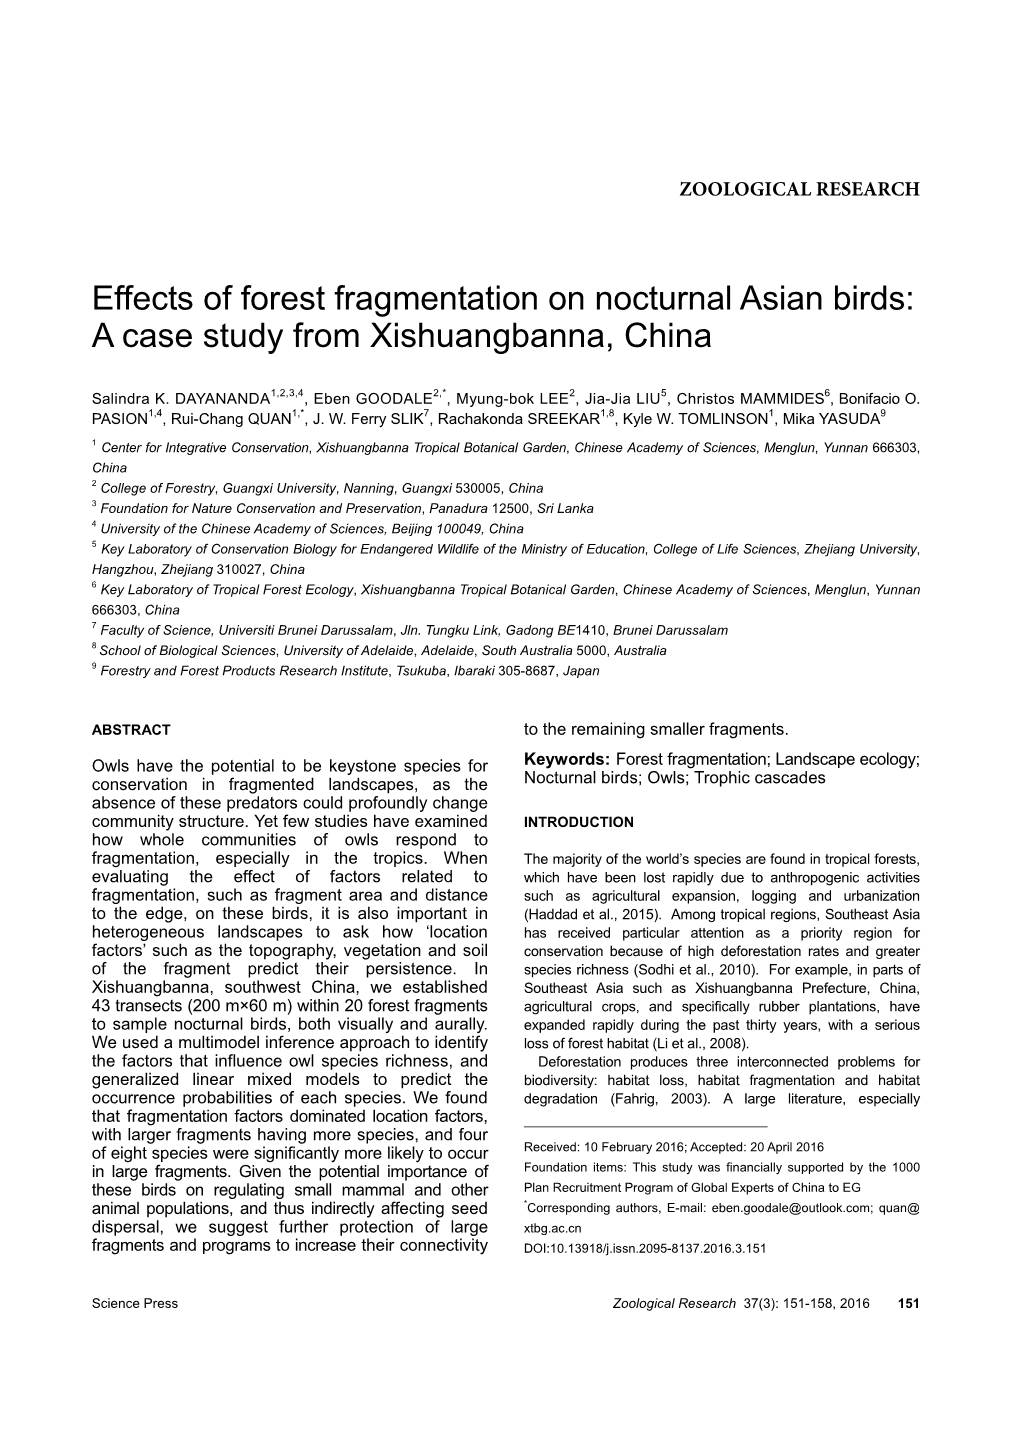 Effects of Forest Fragmentation on Nocturnal Asian Birds: a Case Study from Xishuangbanna, China